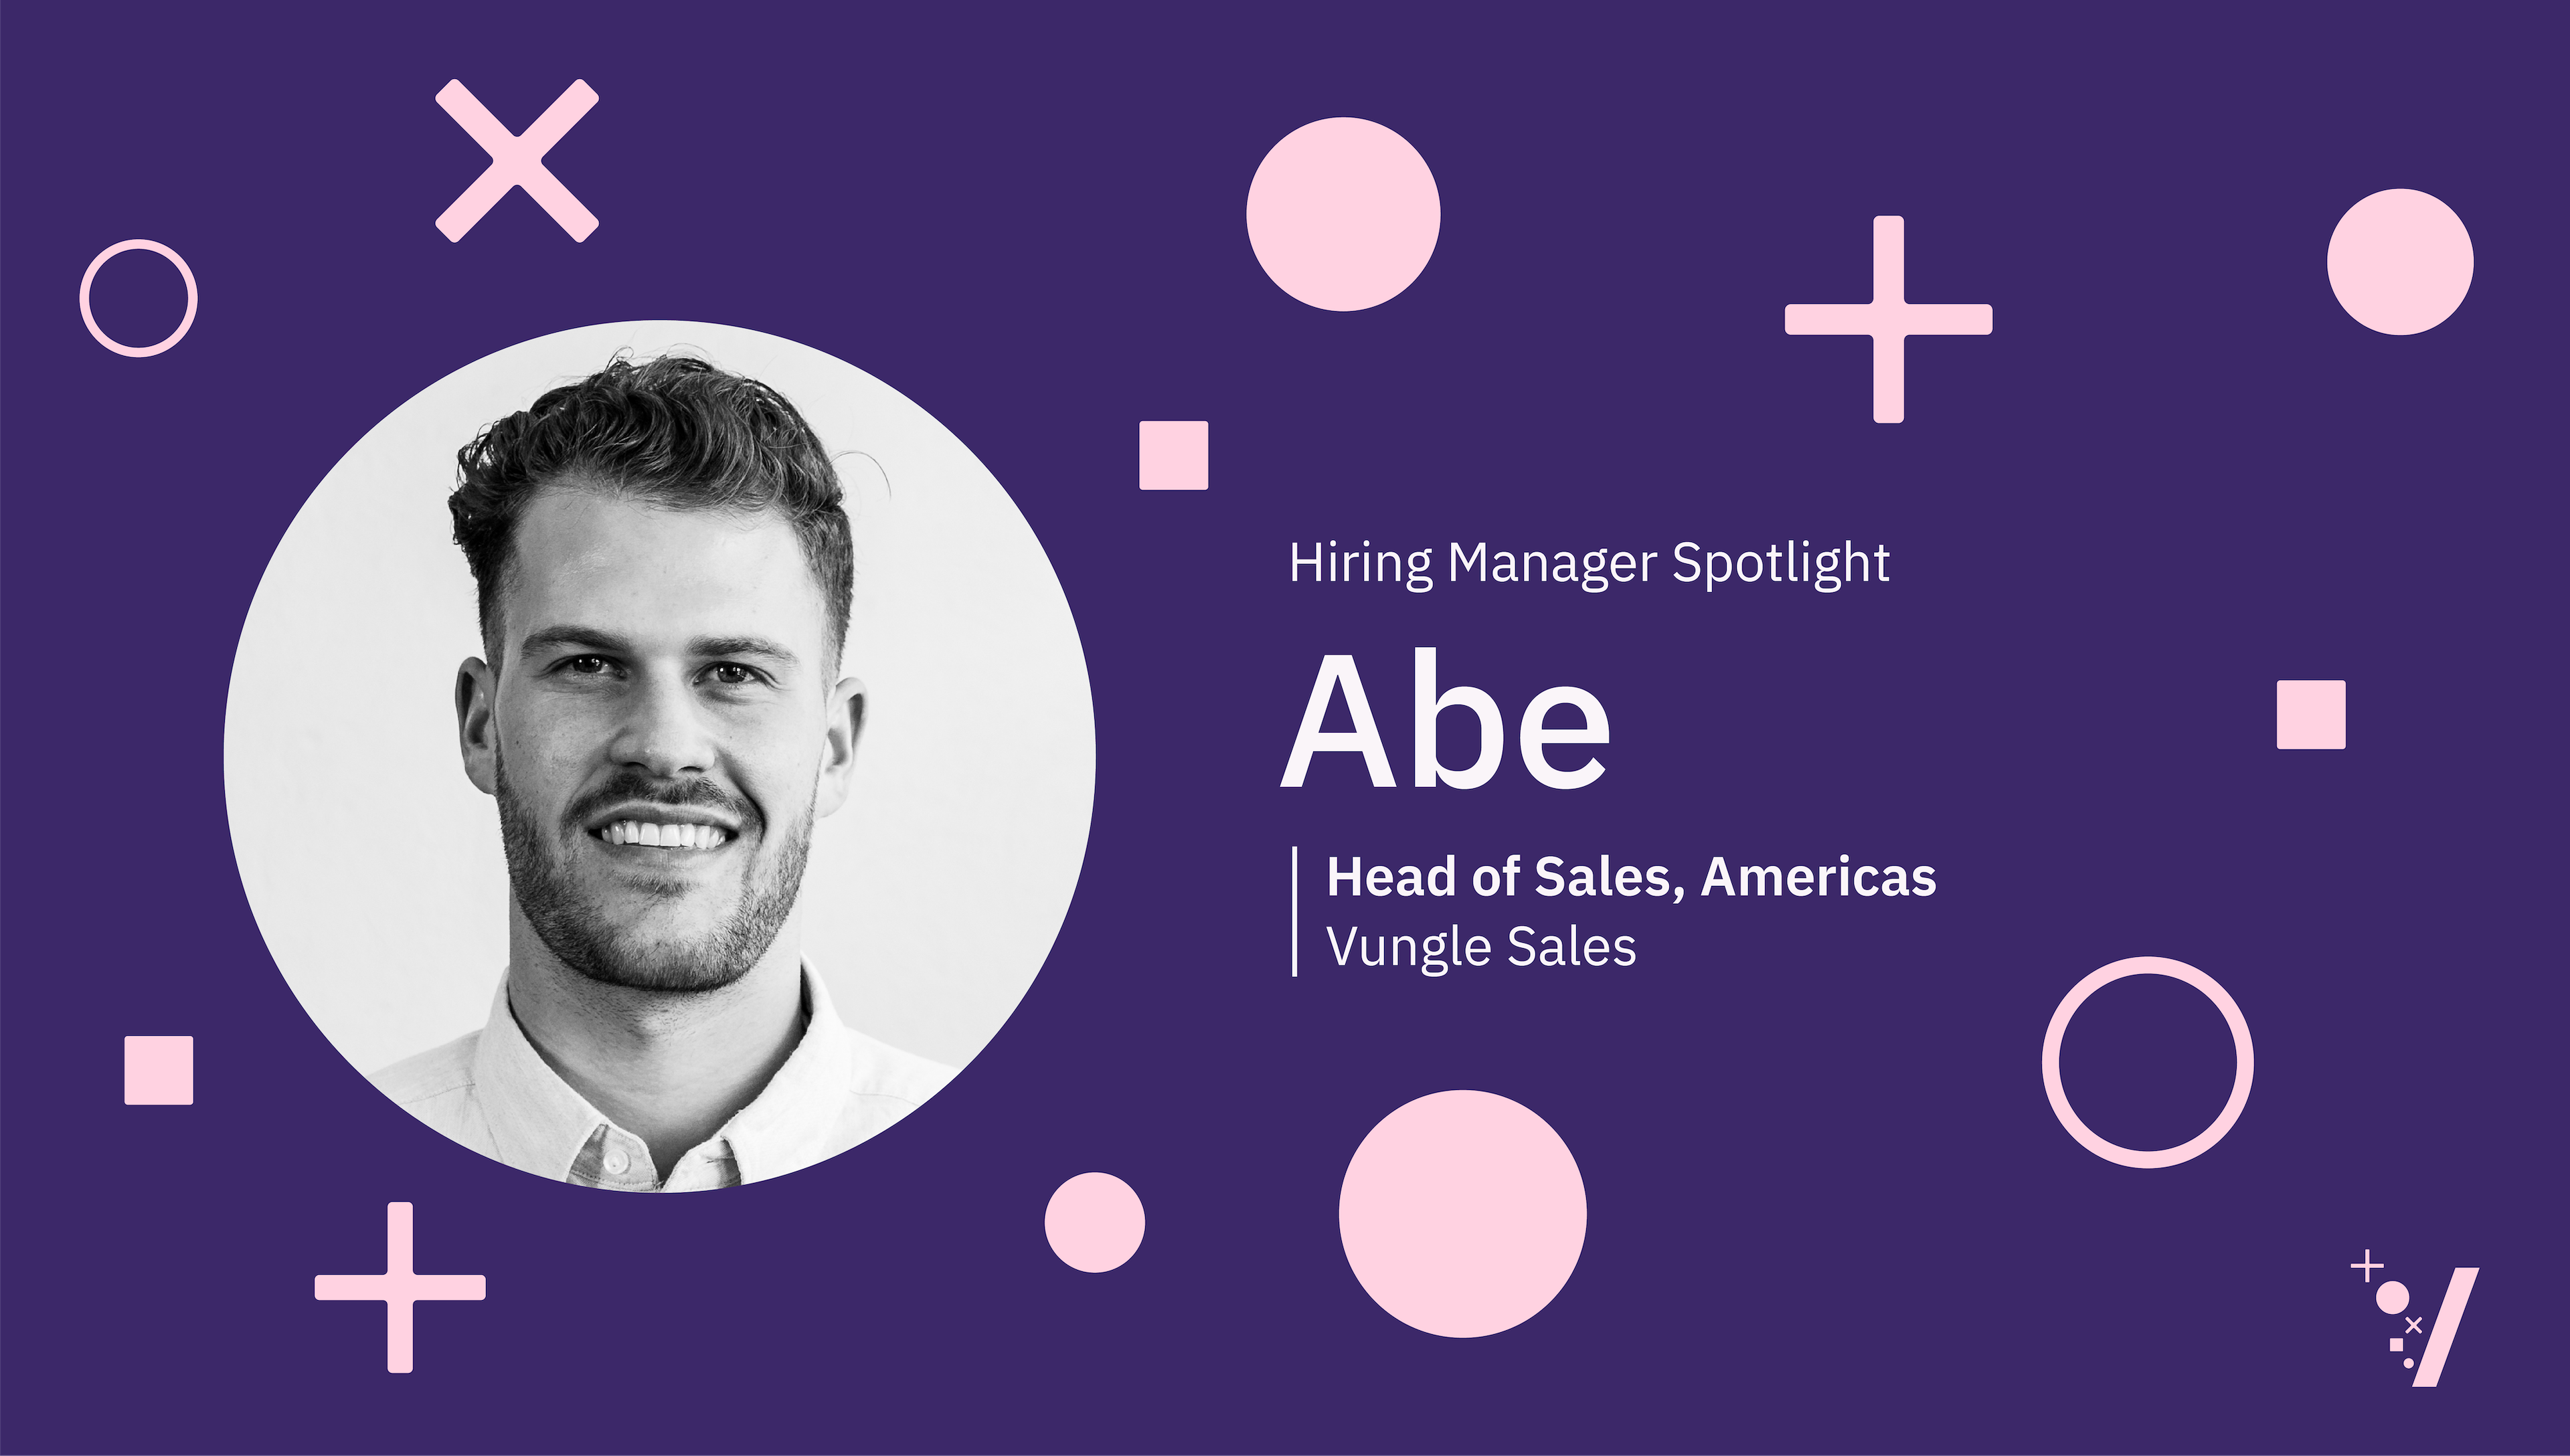 Meet Abe and the Sales Department